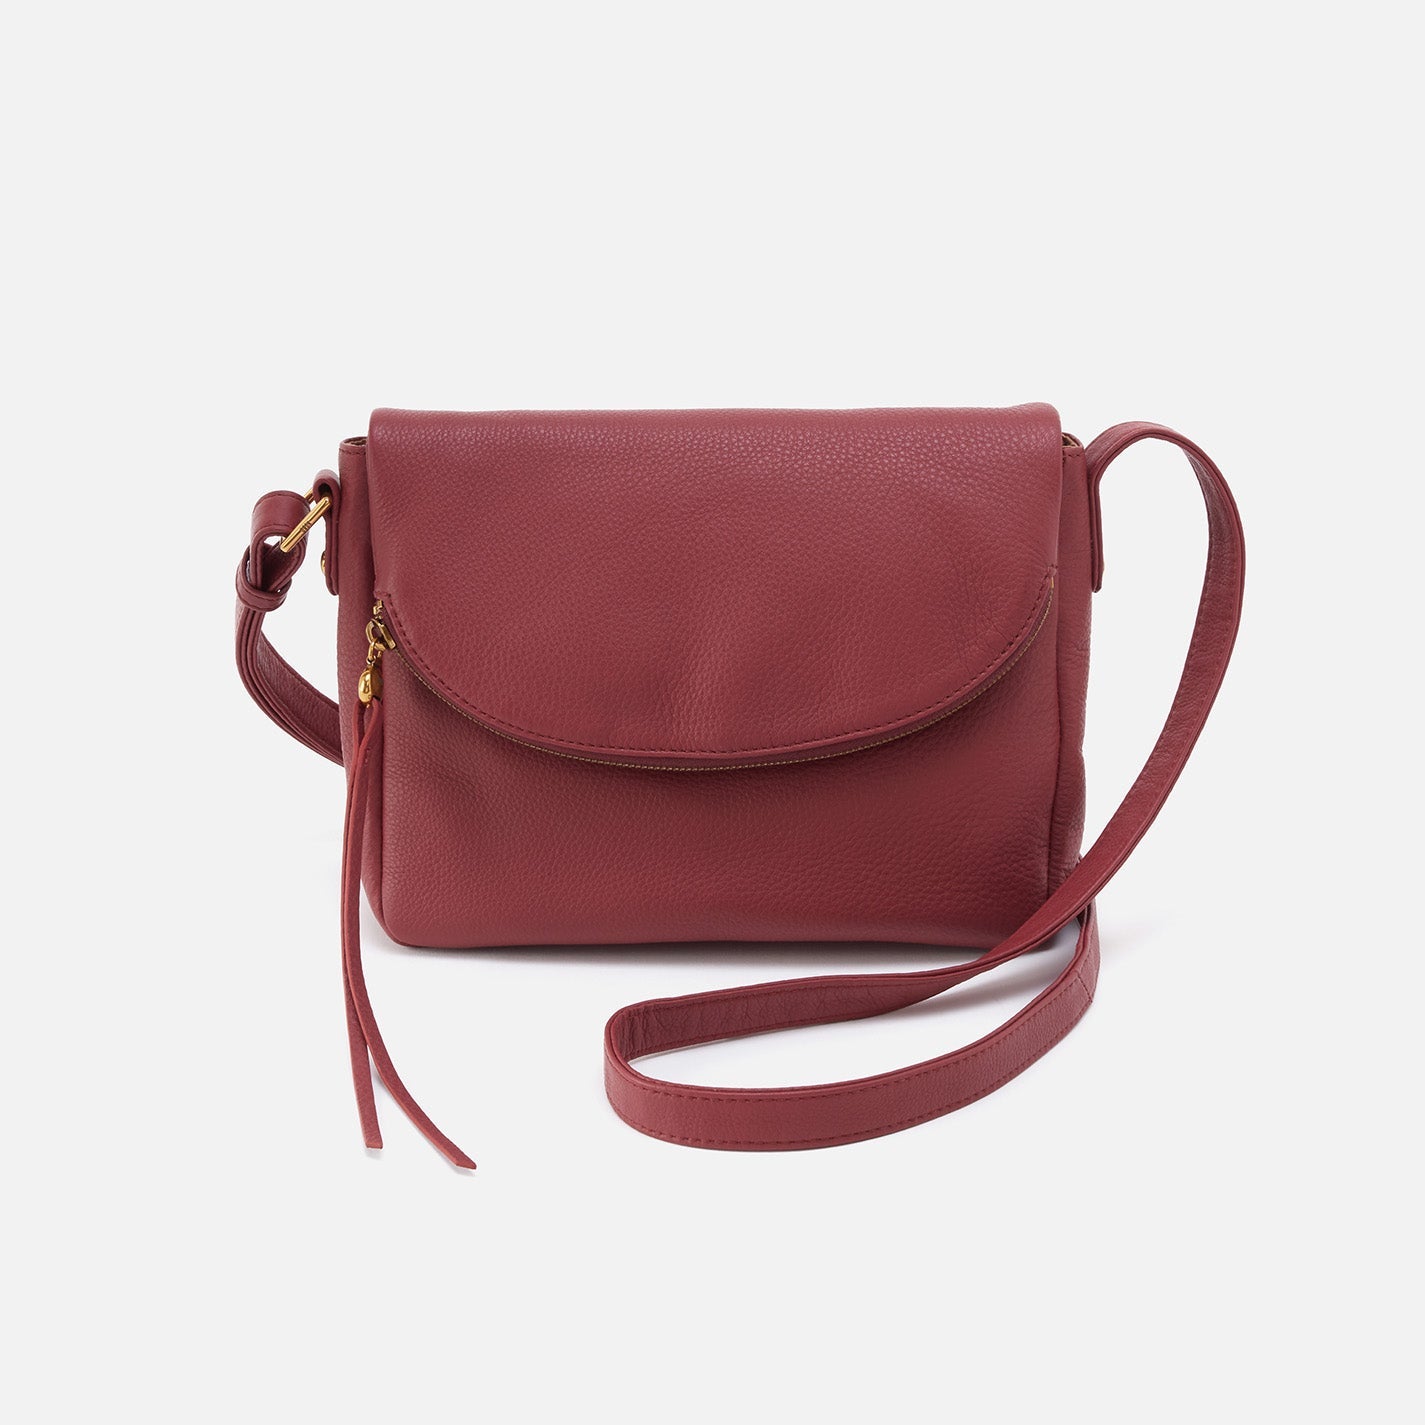 HOBO - FERN MESSENGER BAG IN RED PEAR LEATHER